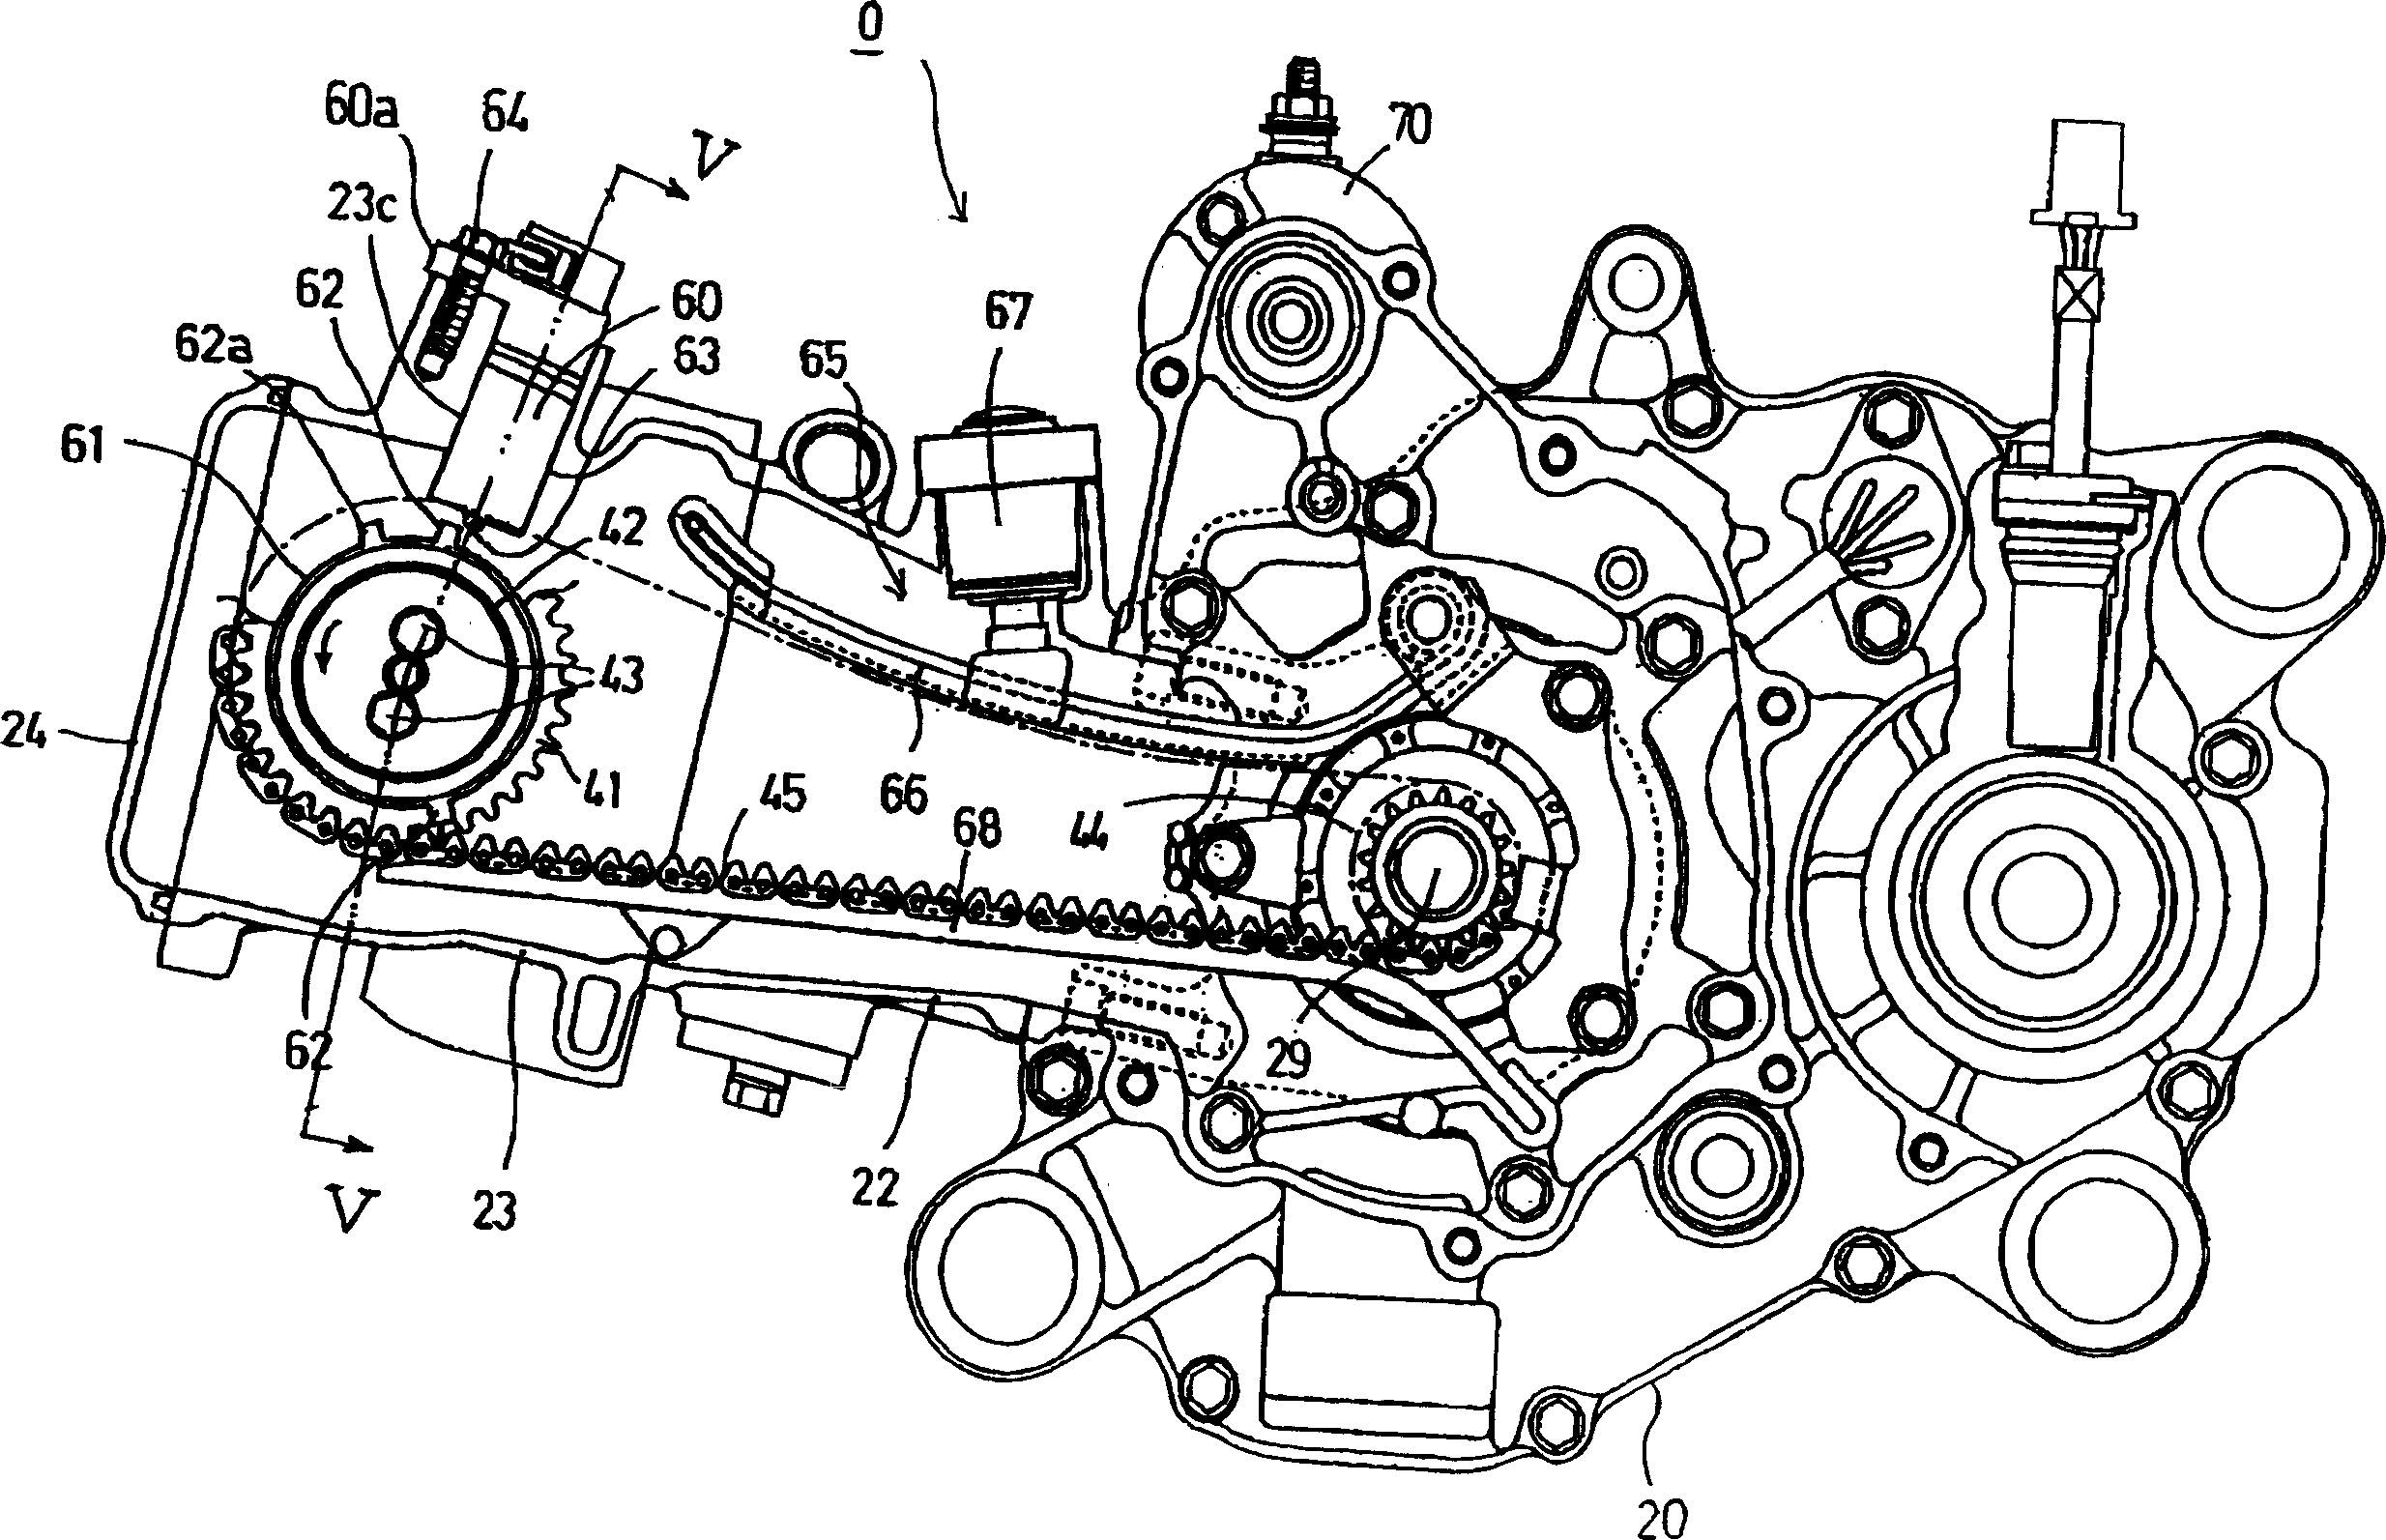 Cam shaft angle sensor mounting structure of IC engine